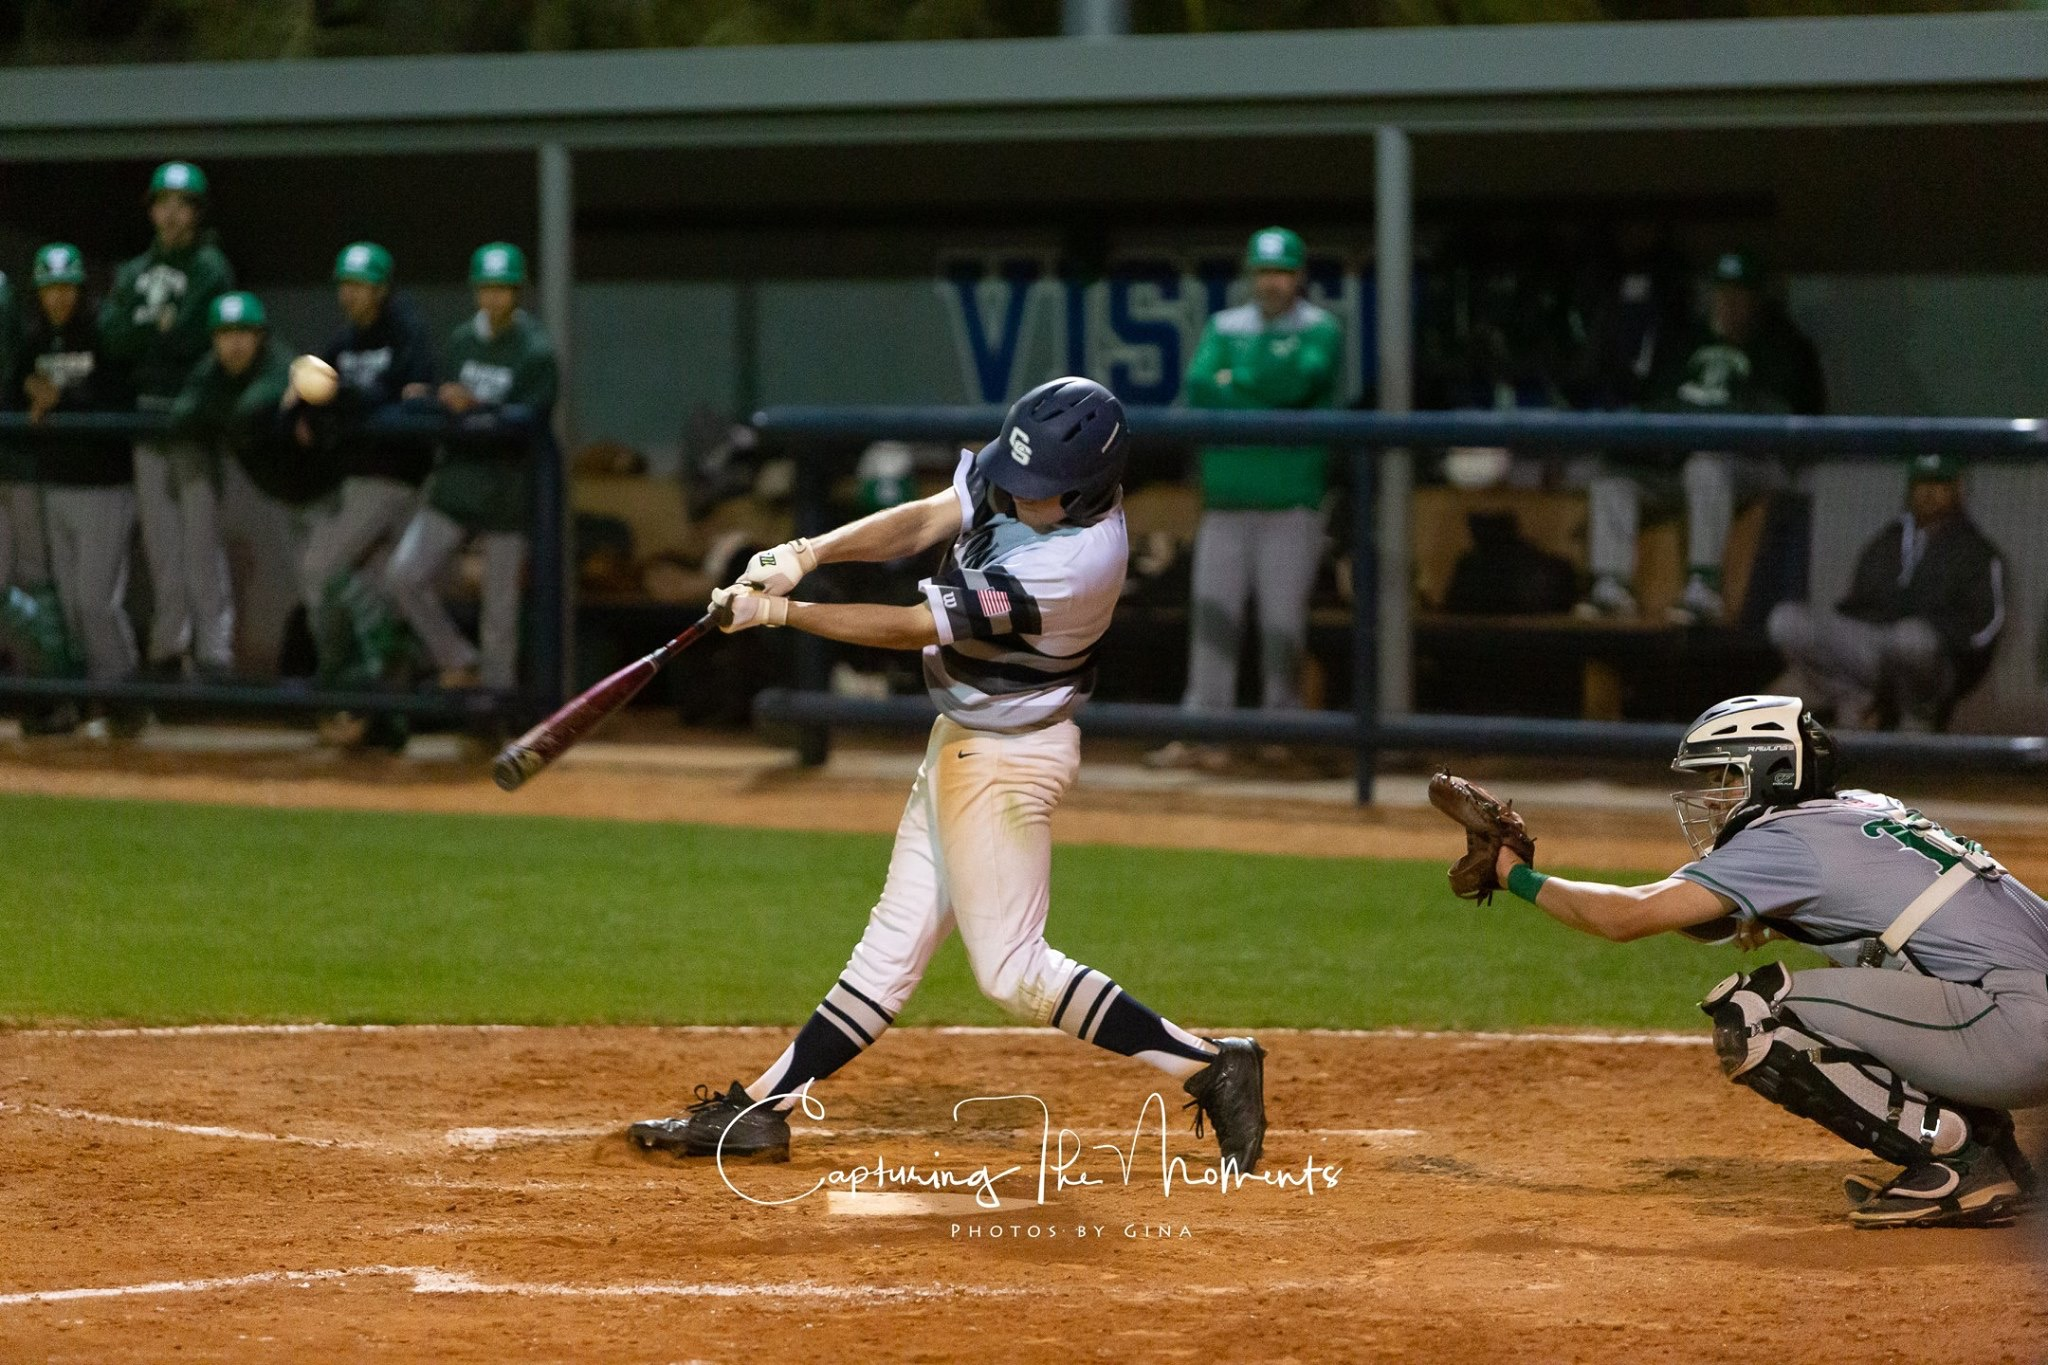 Check out the photos and videos of the baseball recruiting profile Seth Martin